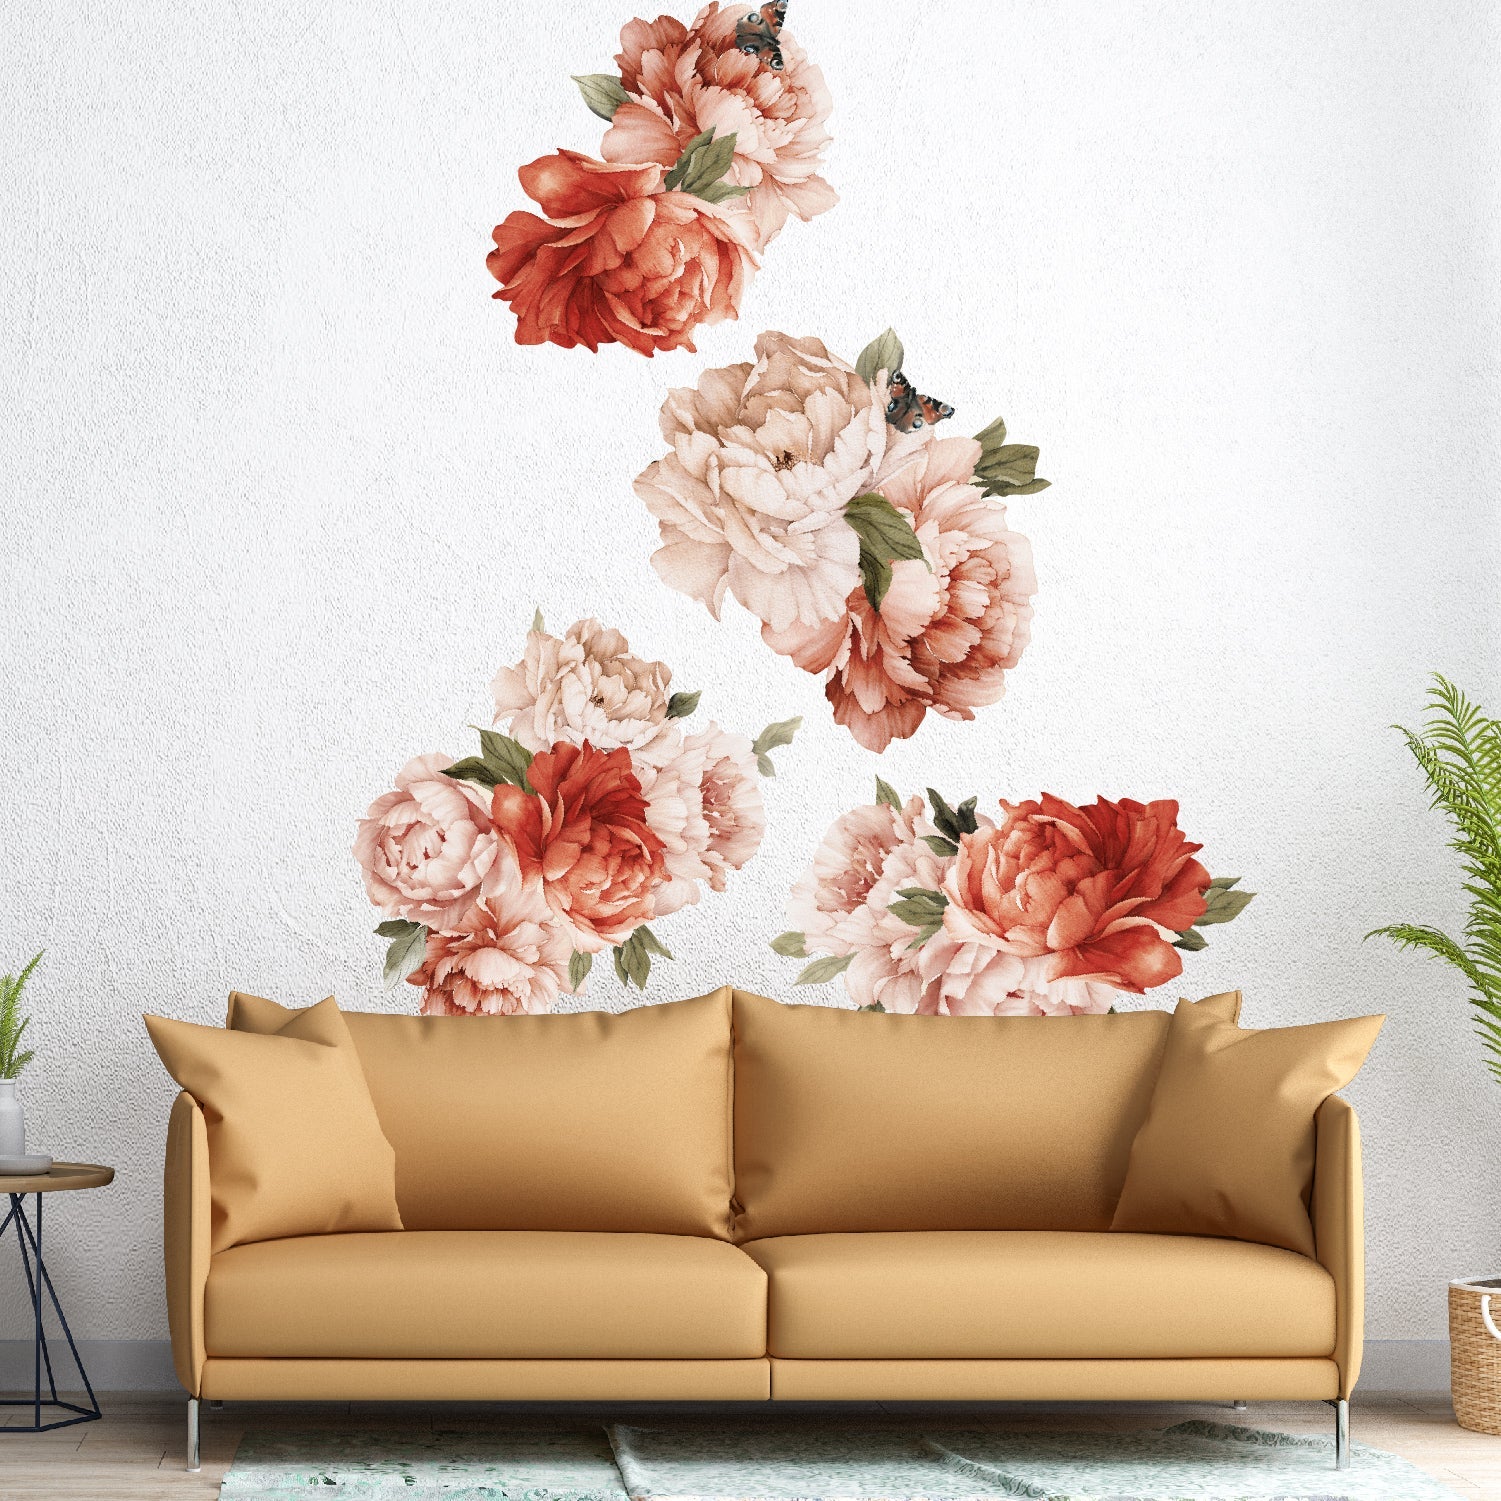 Peonies Wall Decals Vintage Floral Wallpaper Stickers | Coral - Picture Perfect Decals